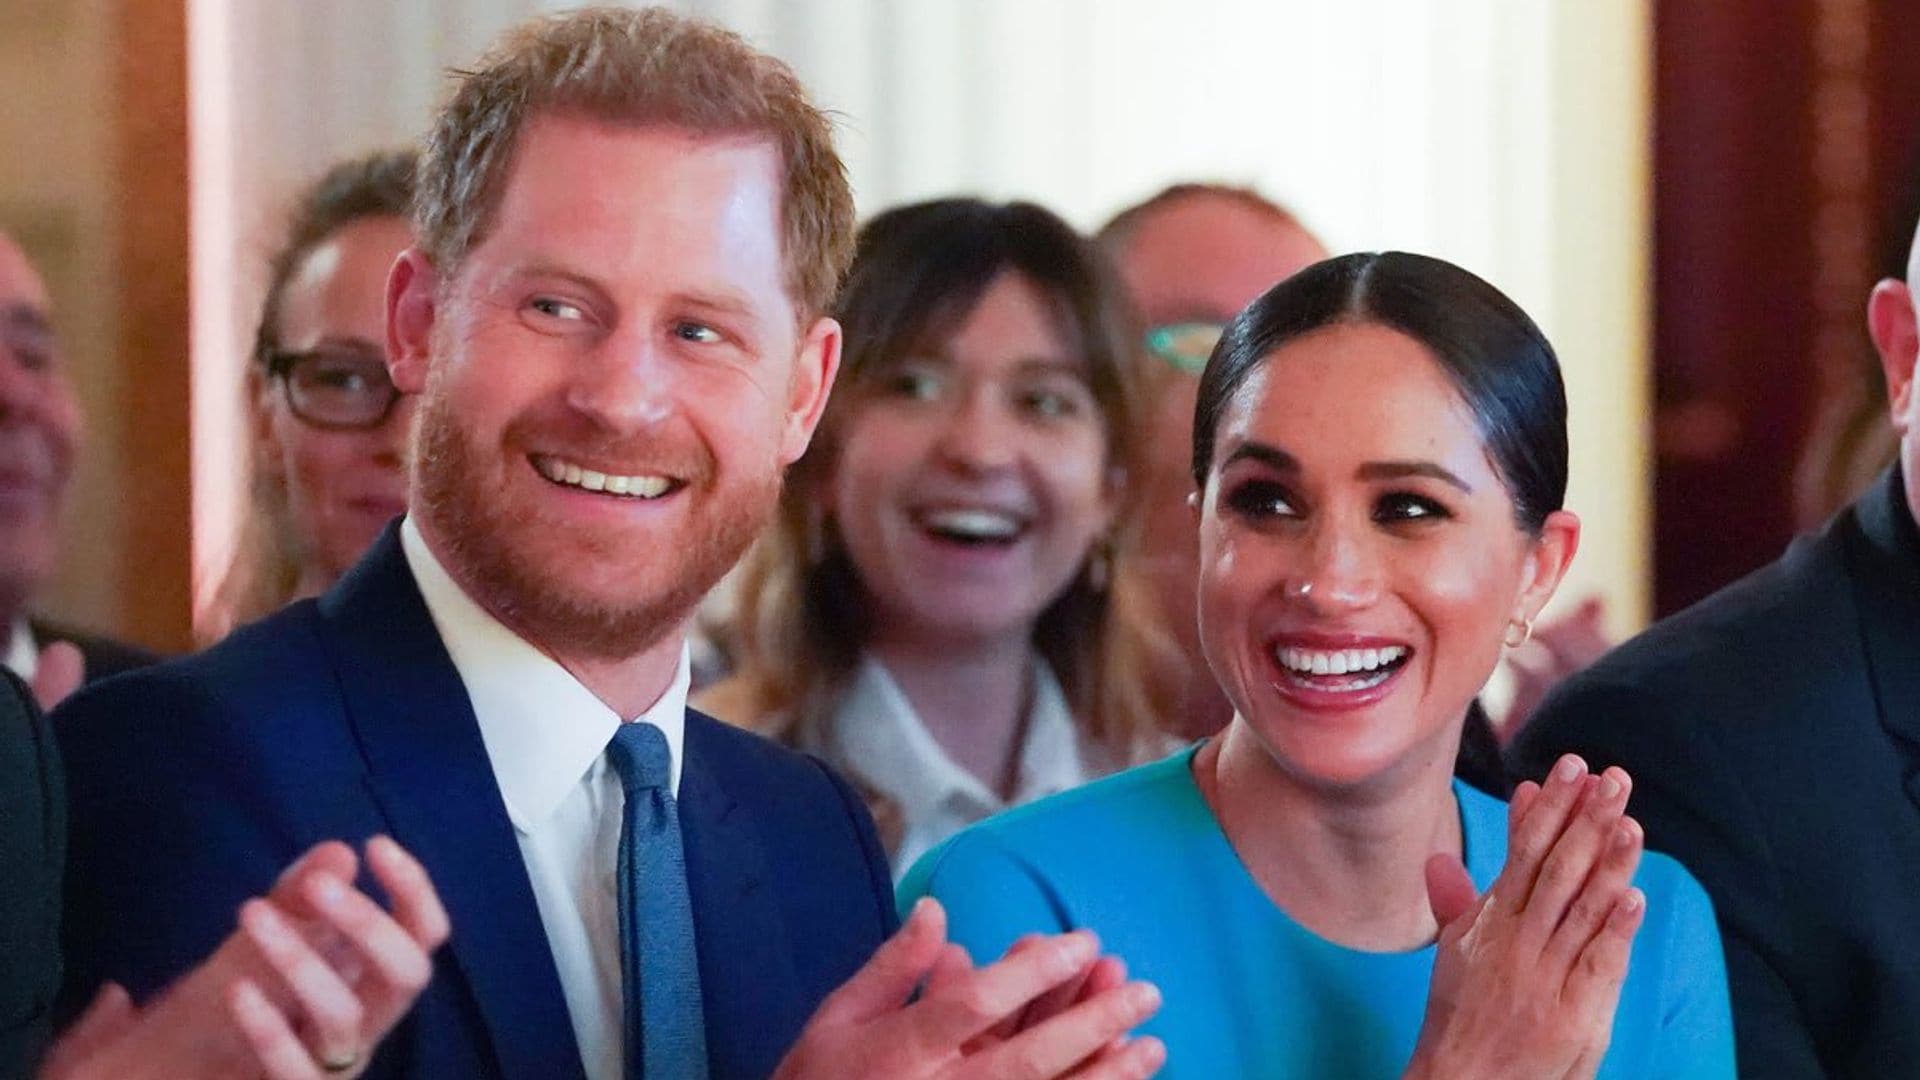 Prince Harry wondered if his cameo in Meghan Markle's birthday video would be 'weird'